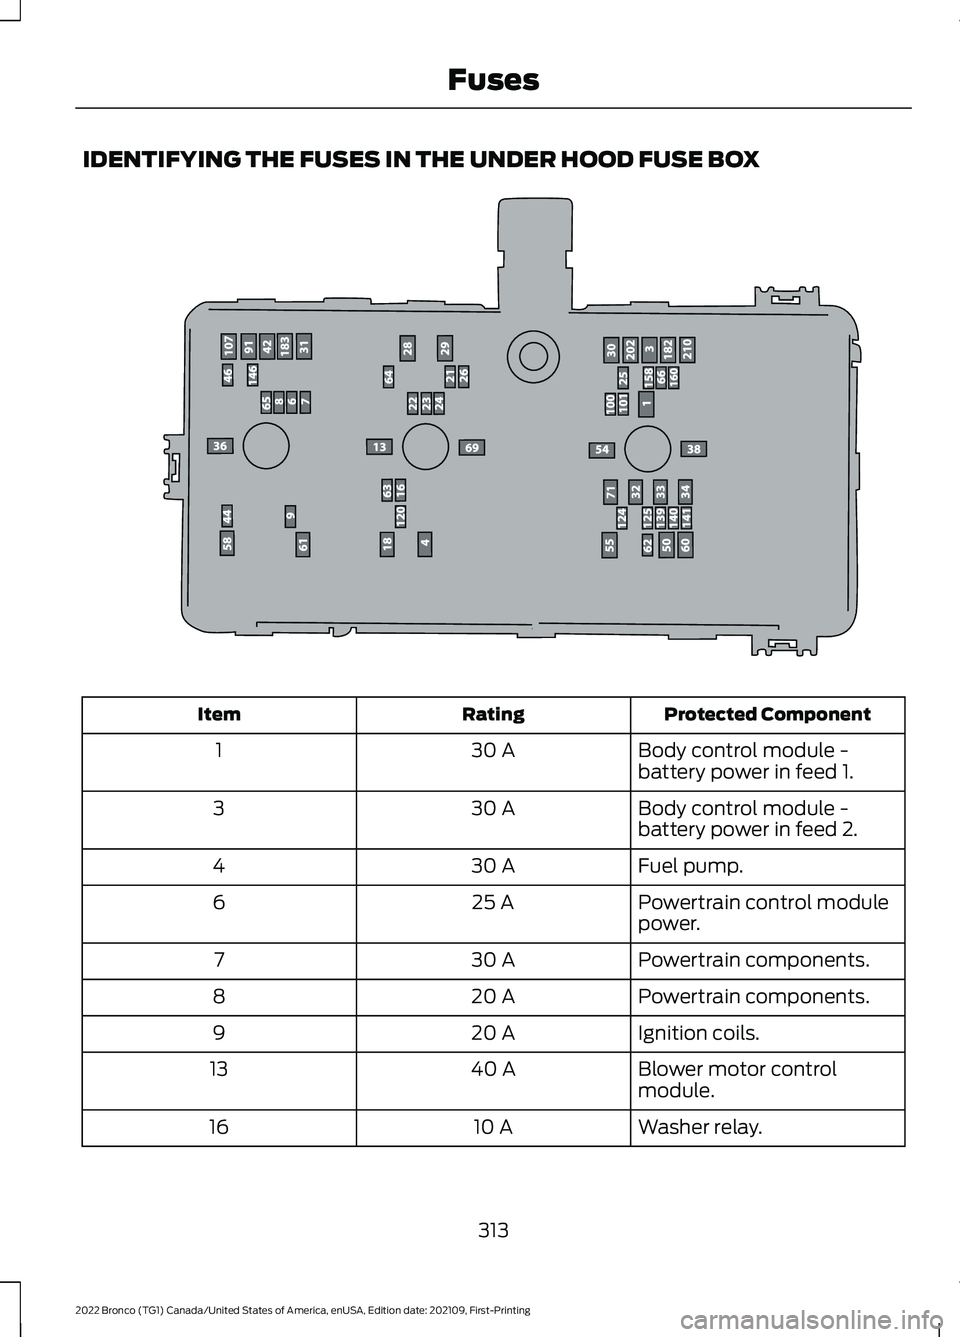 FORD BRONCO 2022  Owners Manual IDENTIFYING THE FUSES IN THE UNDER HOOD FUSE BOX
Protected ComponentRatingItem
Body control module -battery power in feed 1.30 A1
Body control module -battery power in feed 2.30 A3
Fuel pump.30 A4
Pow